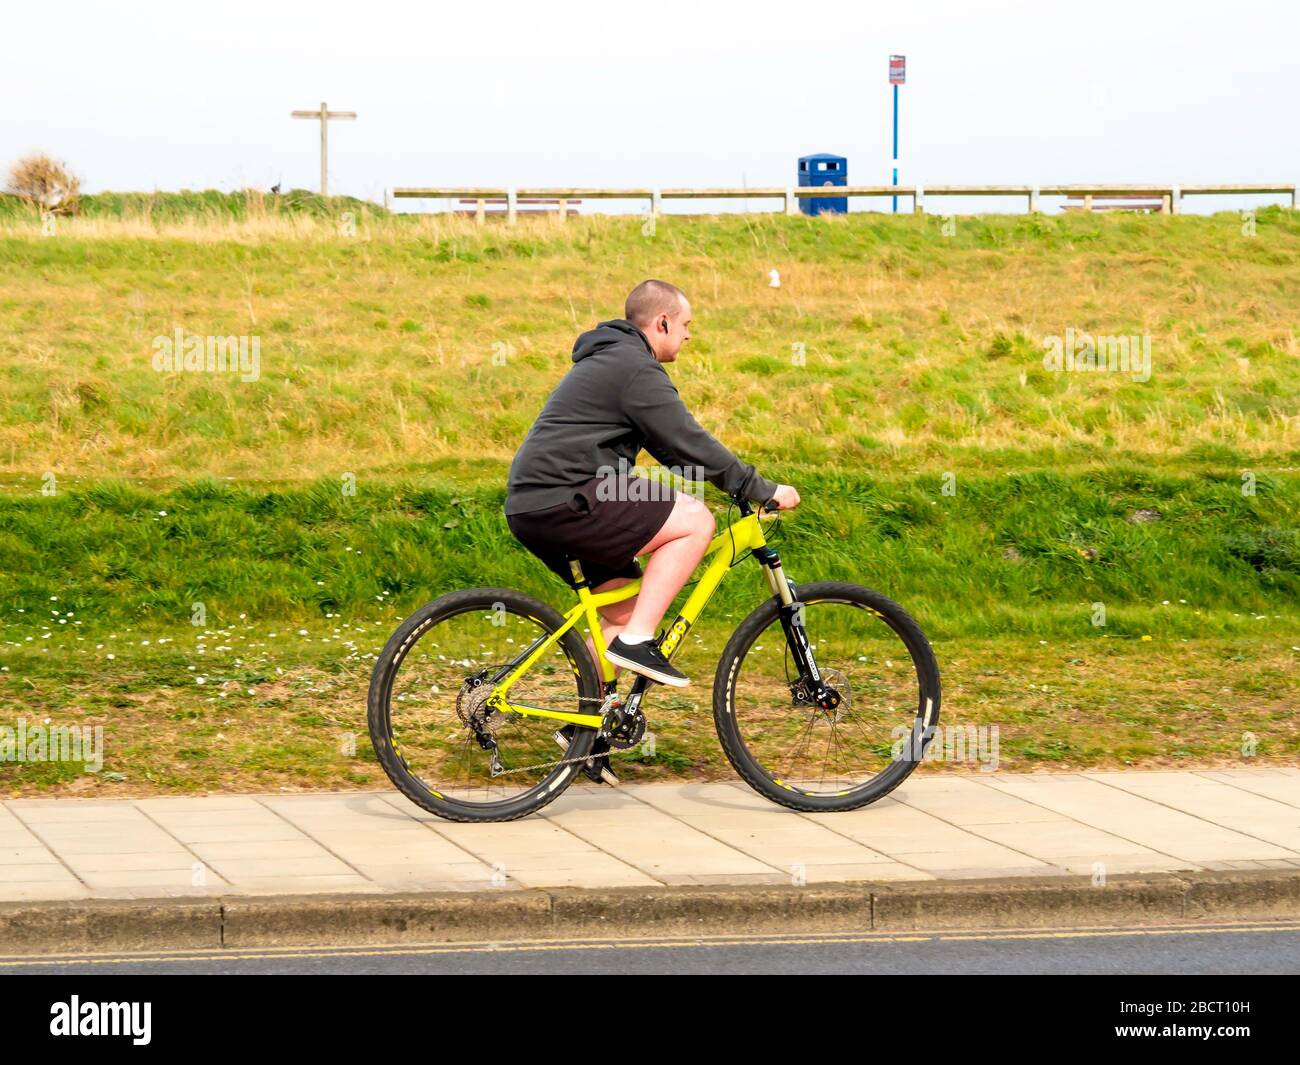 A young man riding a yellow off road bicycle on a cycle track with a grassy bank behind him Stock Photo